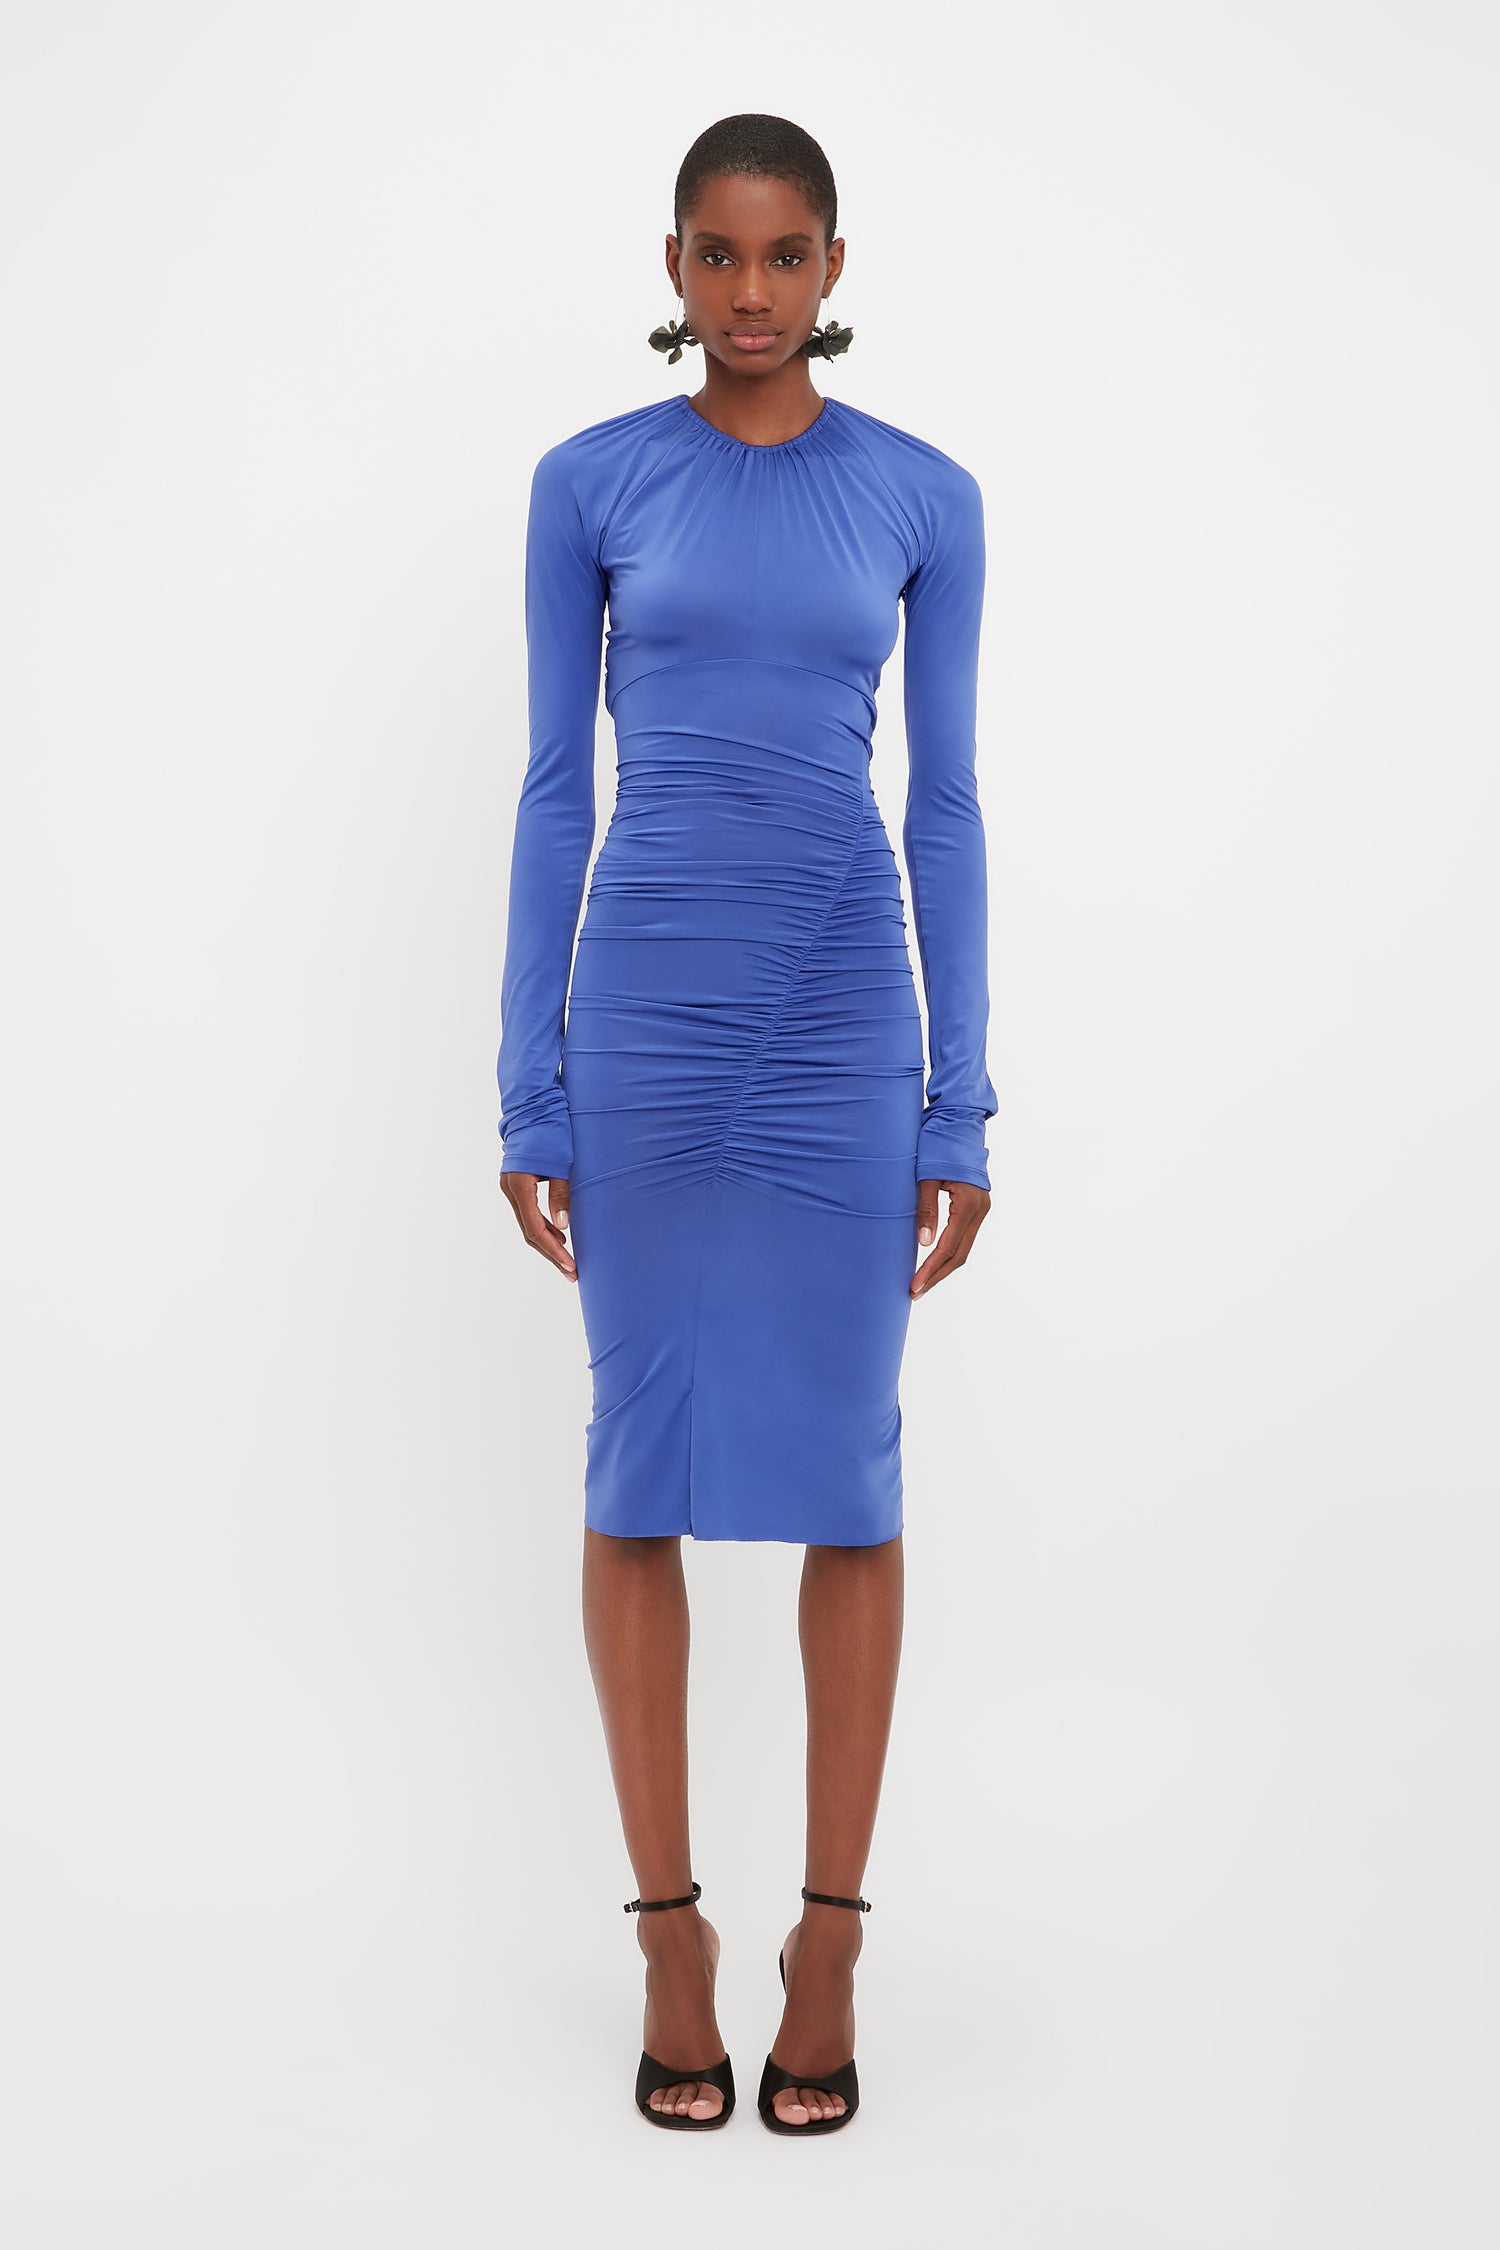 Model wears the Victoria Beckham longsleeve fitted dress in blue. This gathered detail dress comes in a midi length with long sleeves and tie back detailing.